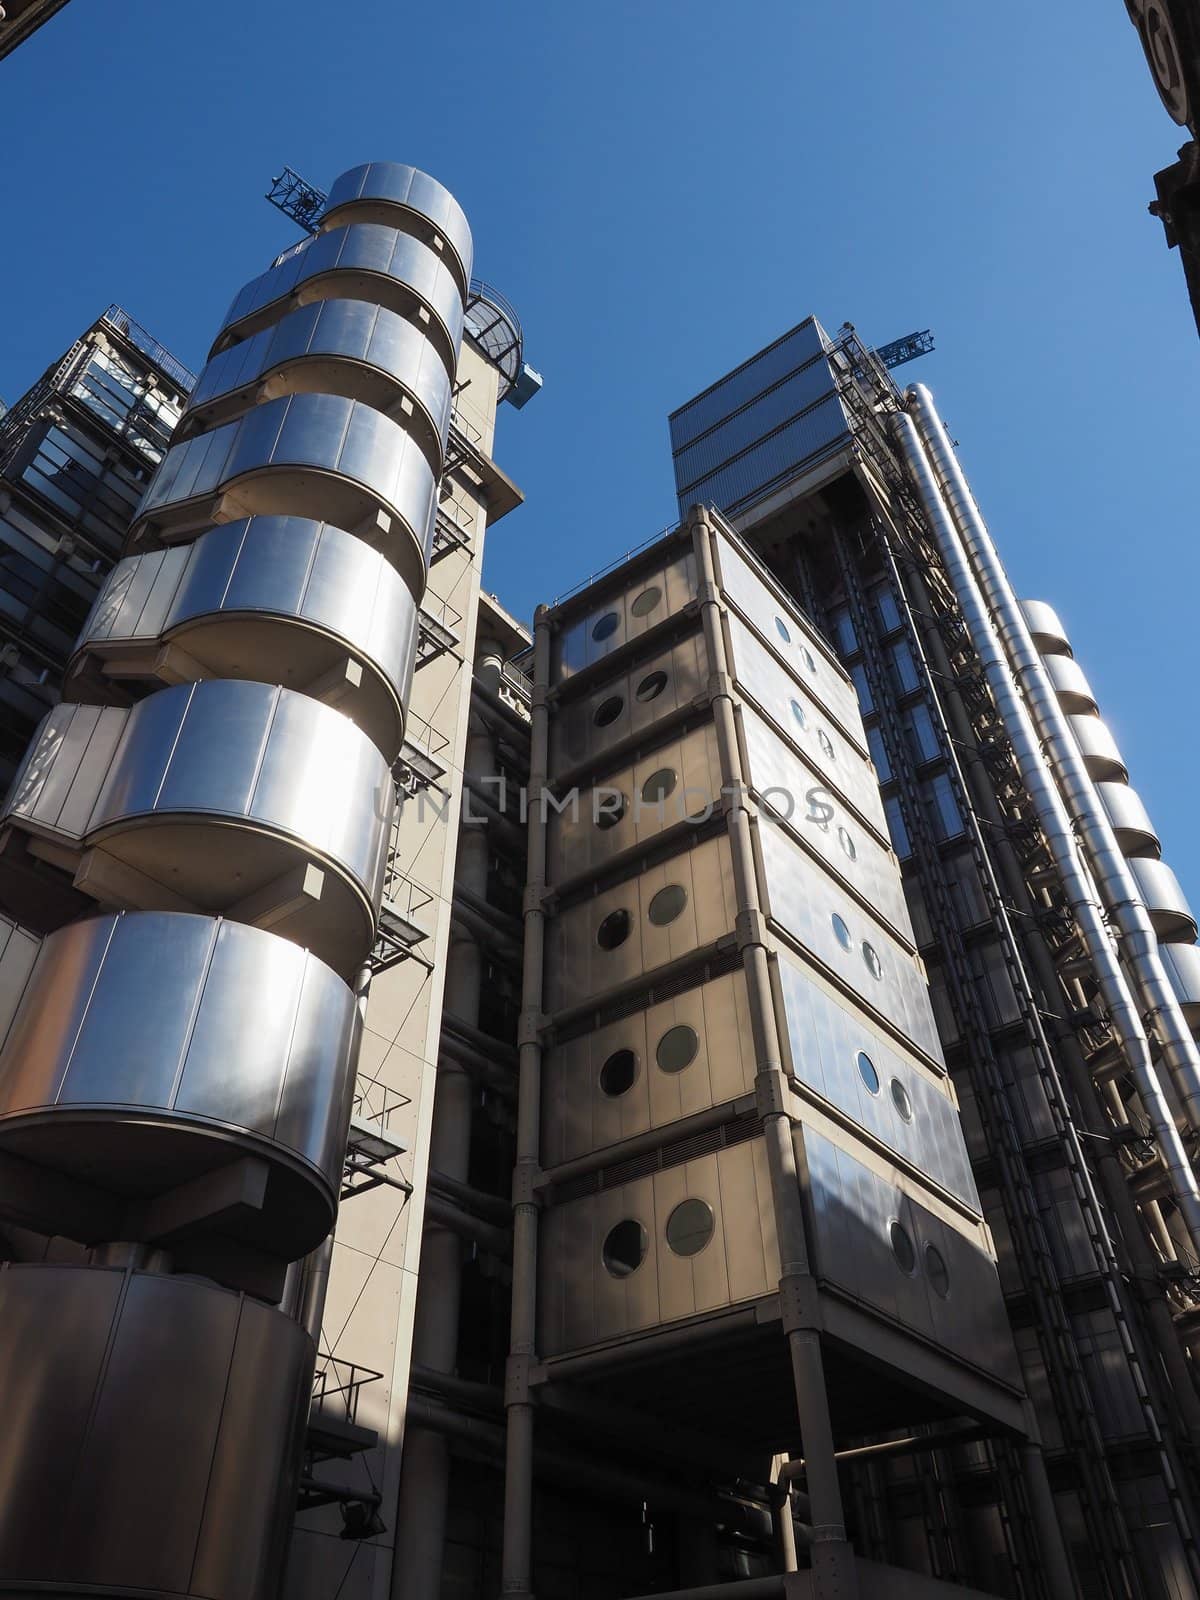 Lloyds building in London by claudiodivizia